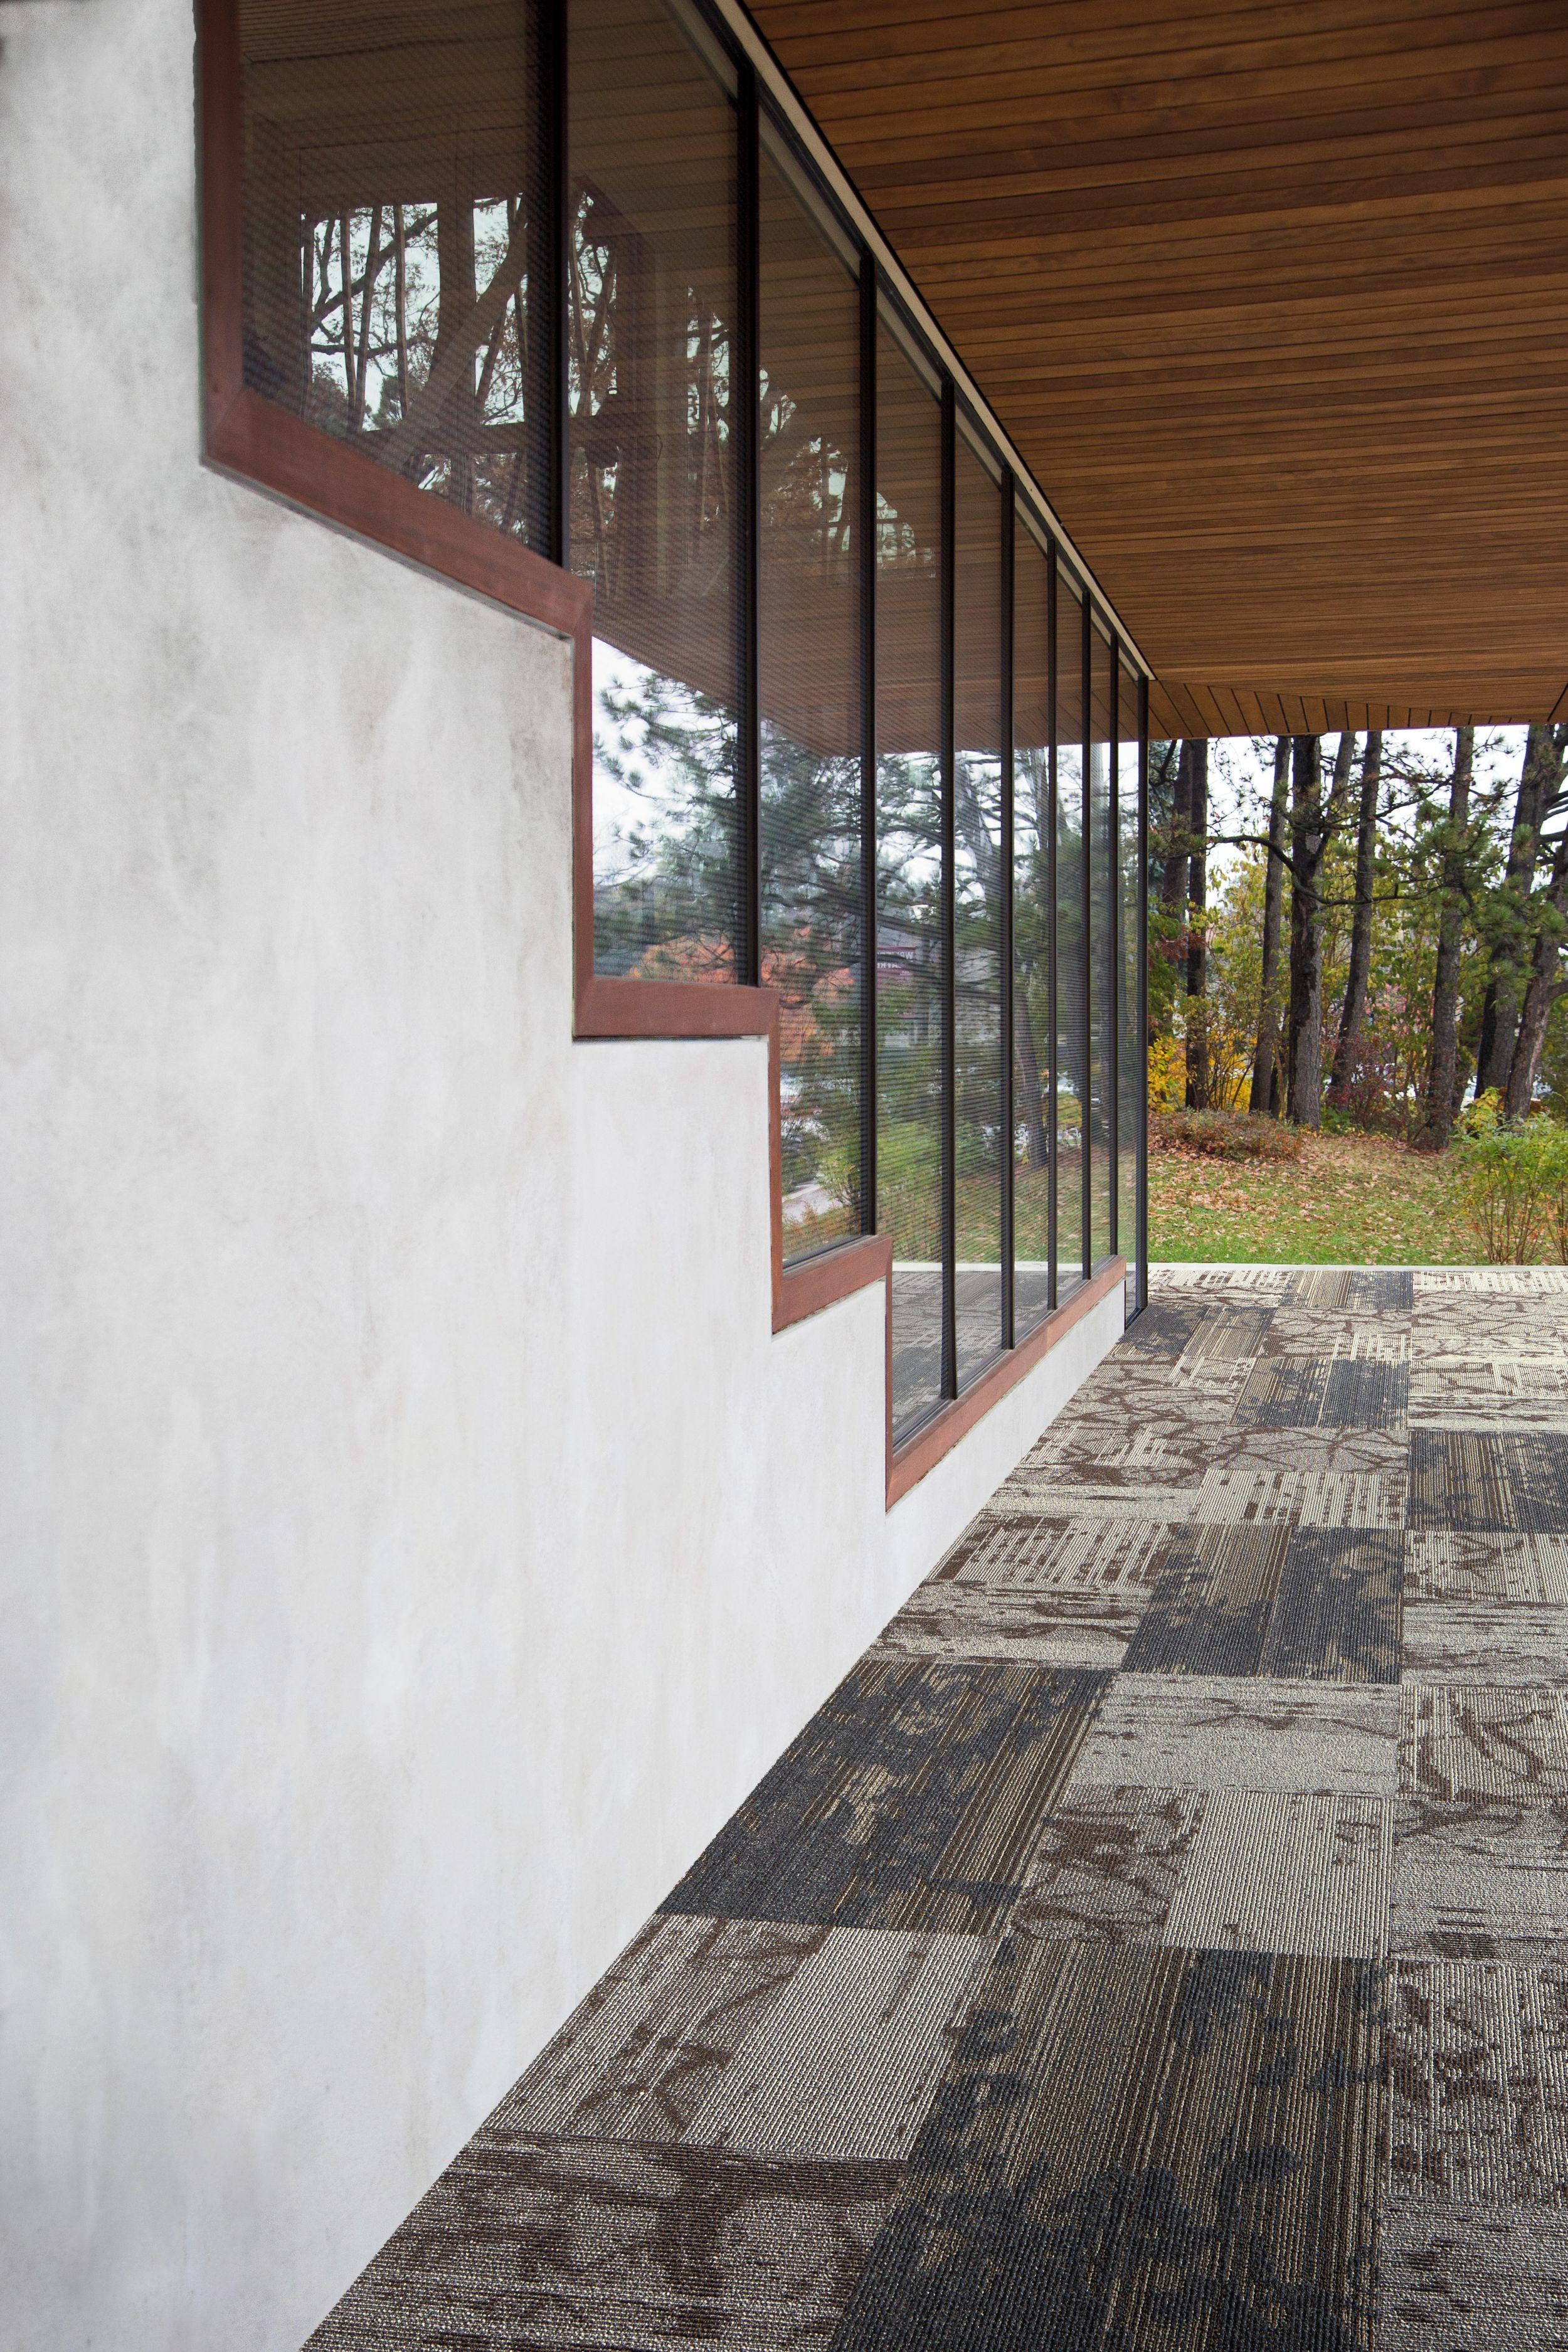 Interface Glazing and Ground plank carpet tile shown for inspiration in outdoor setting numéro d’image 15